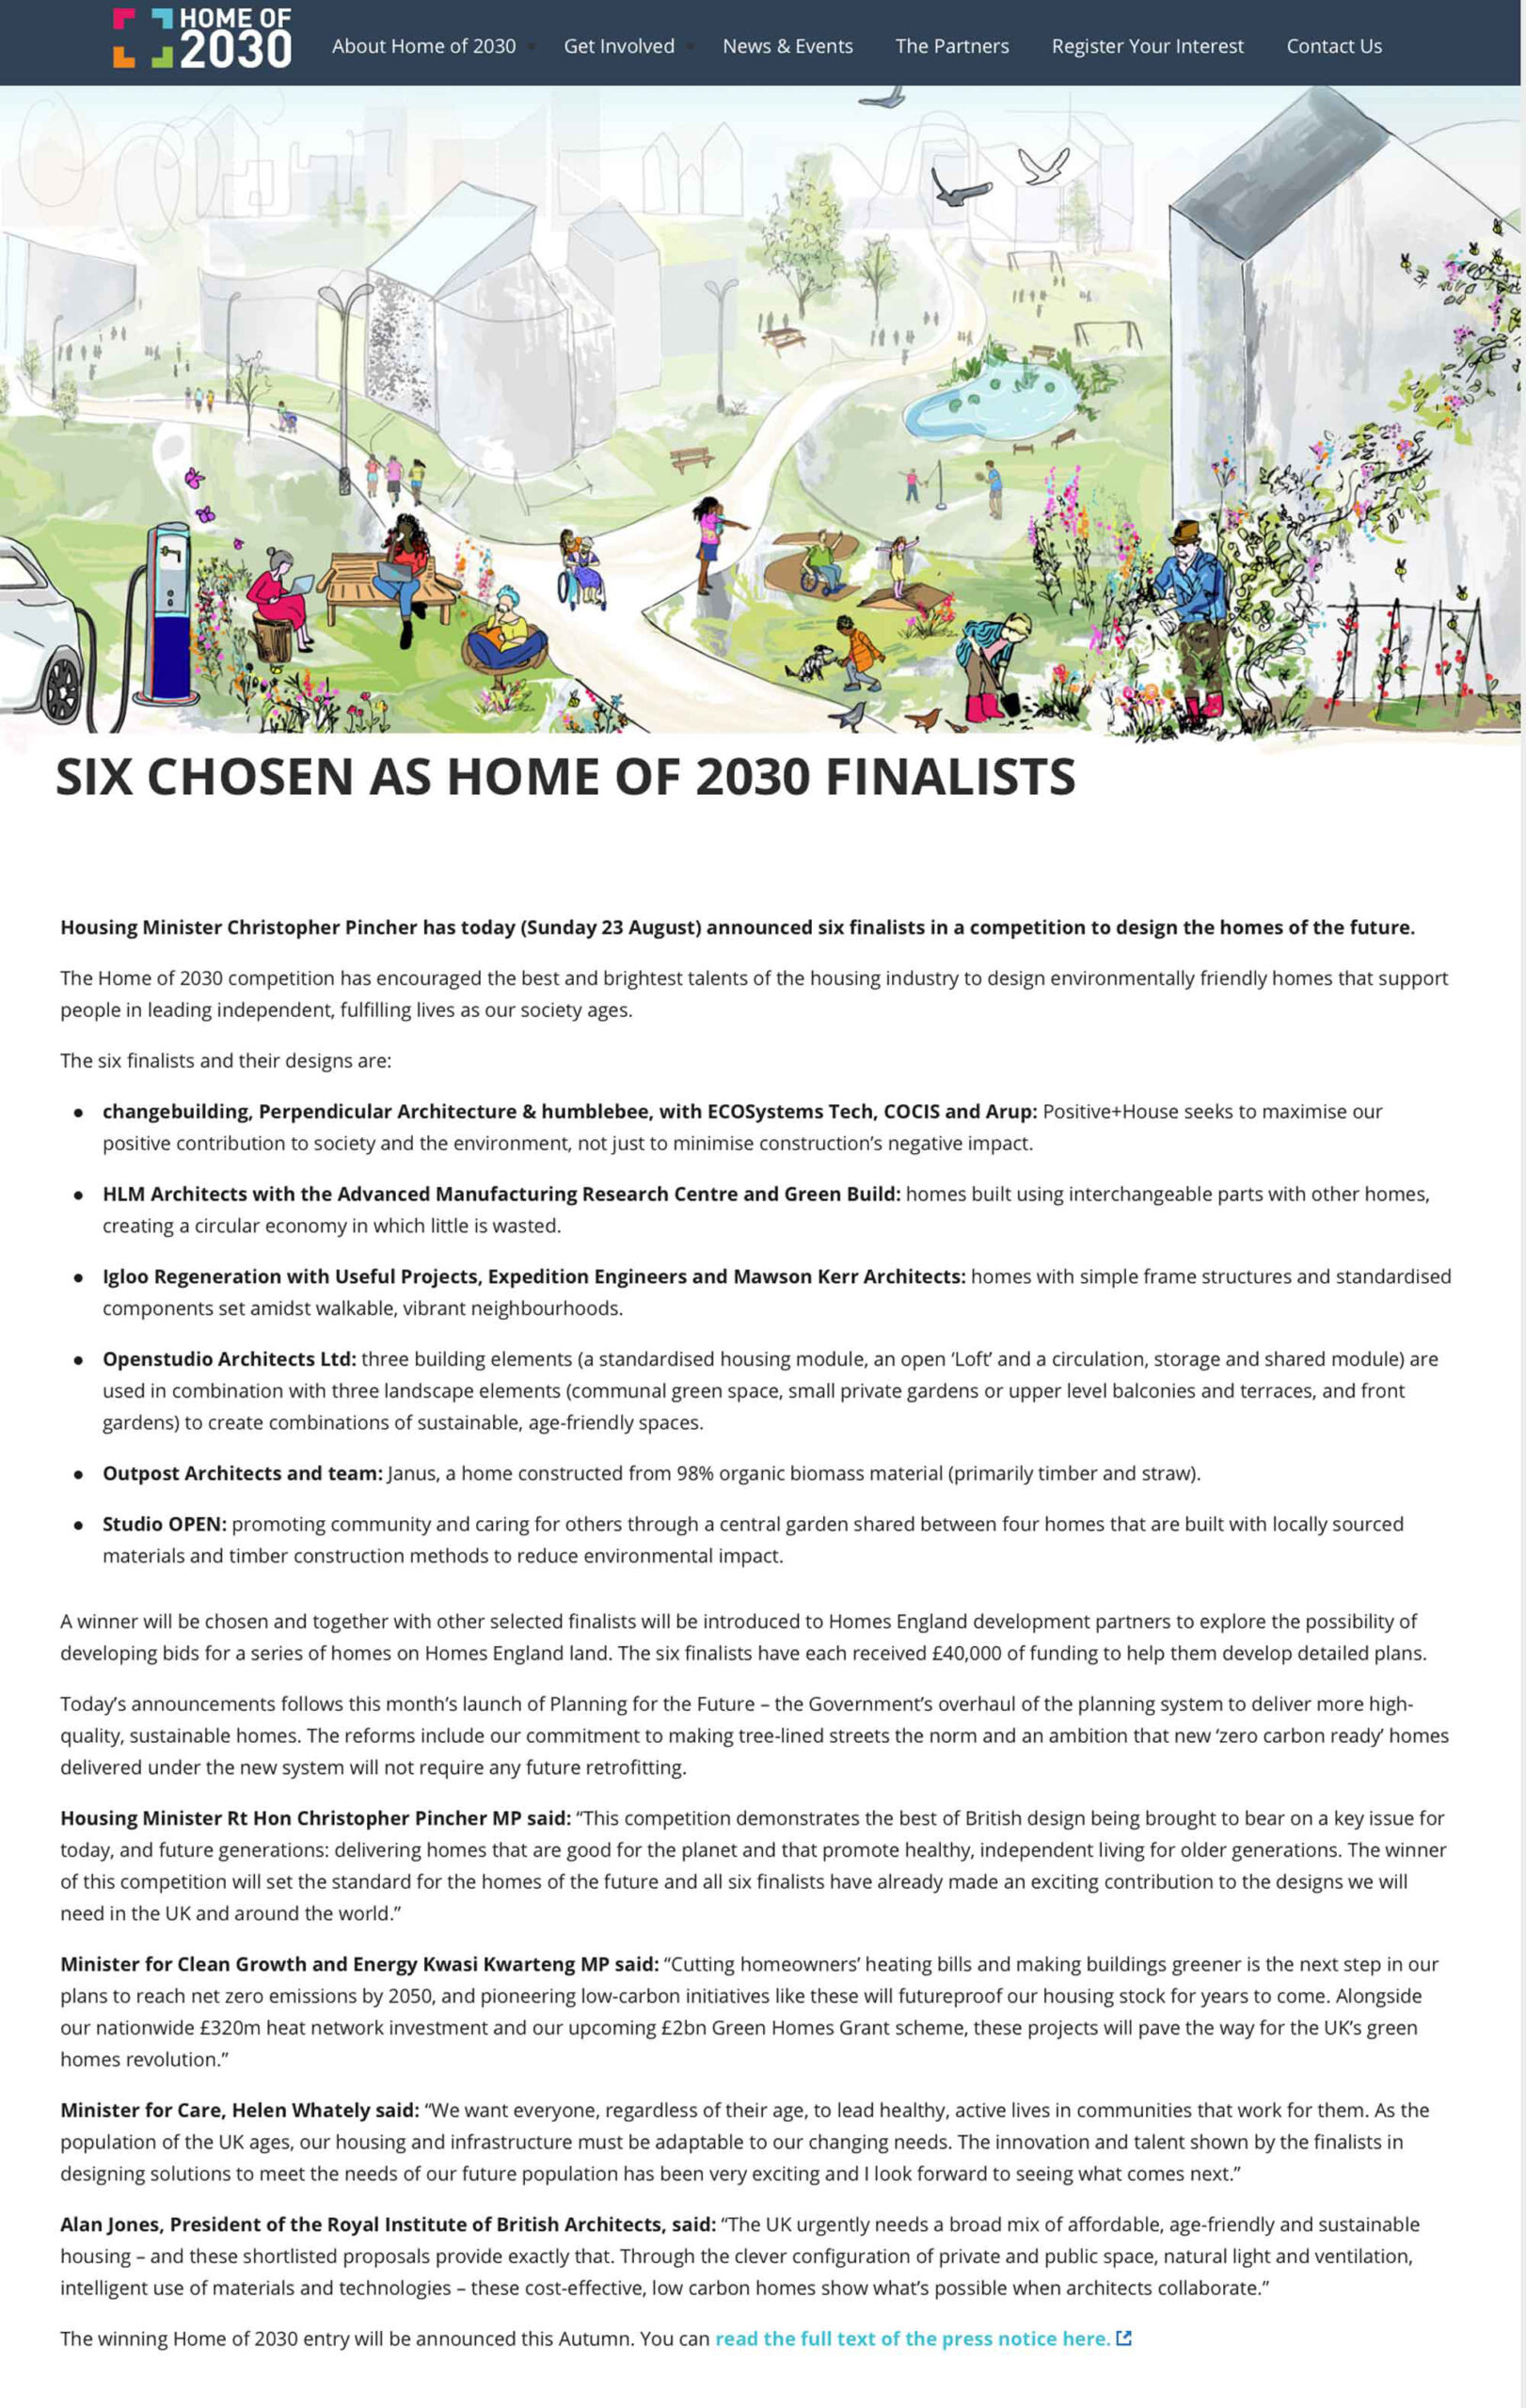 RIBA-competition-home-of-2030-finalists-openstudio-architects